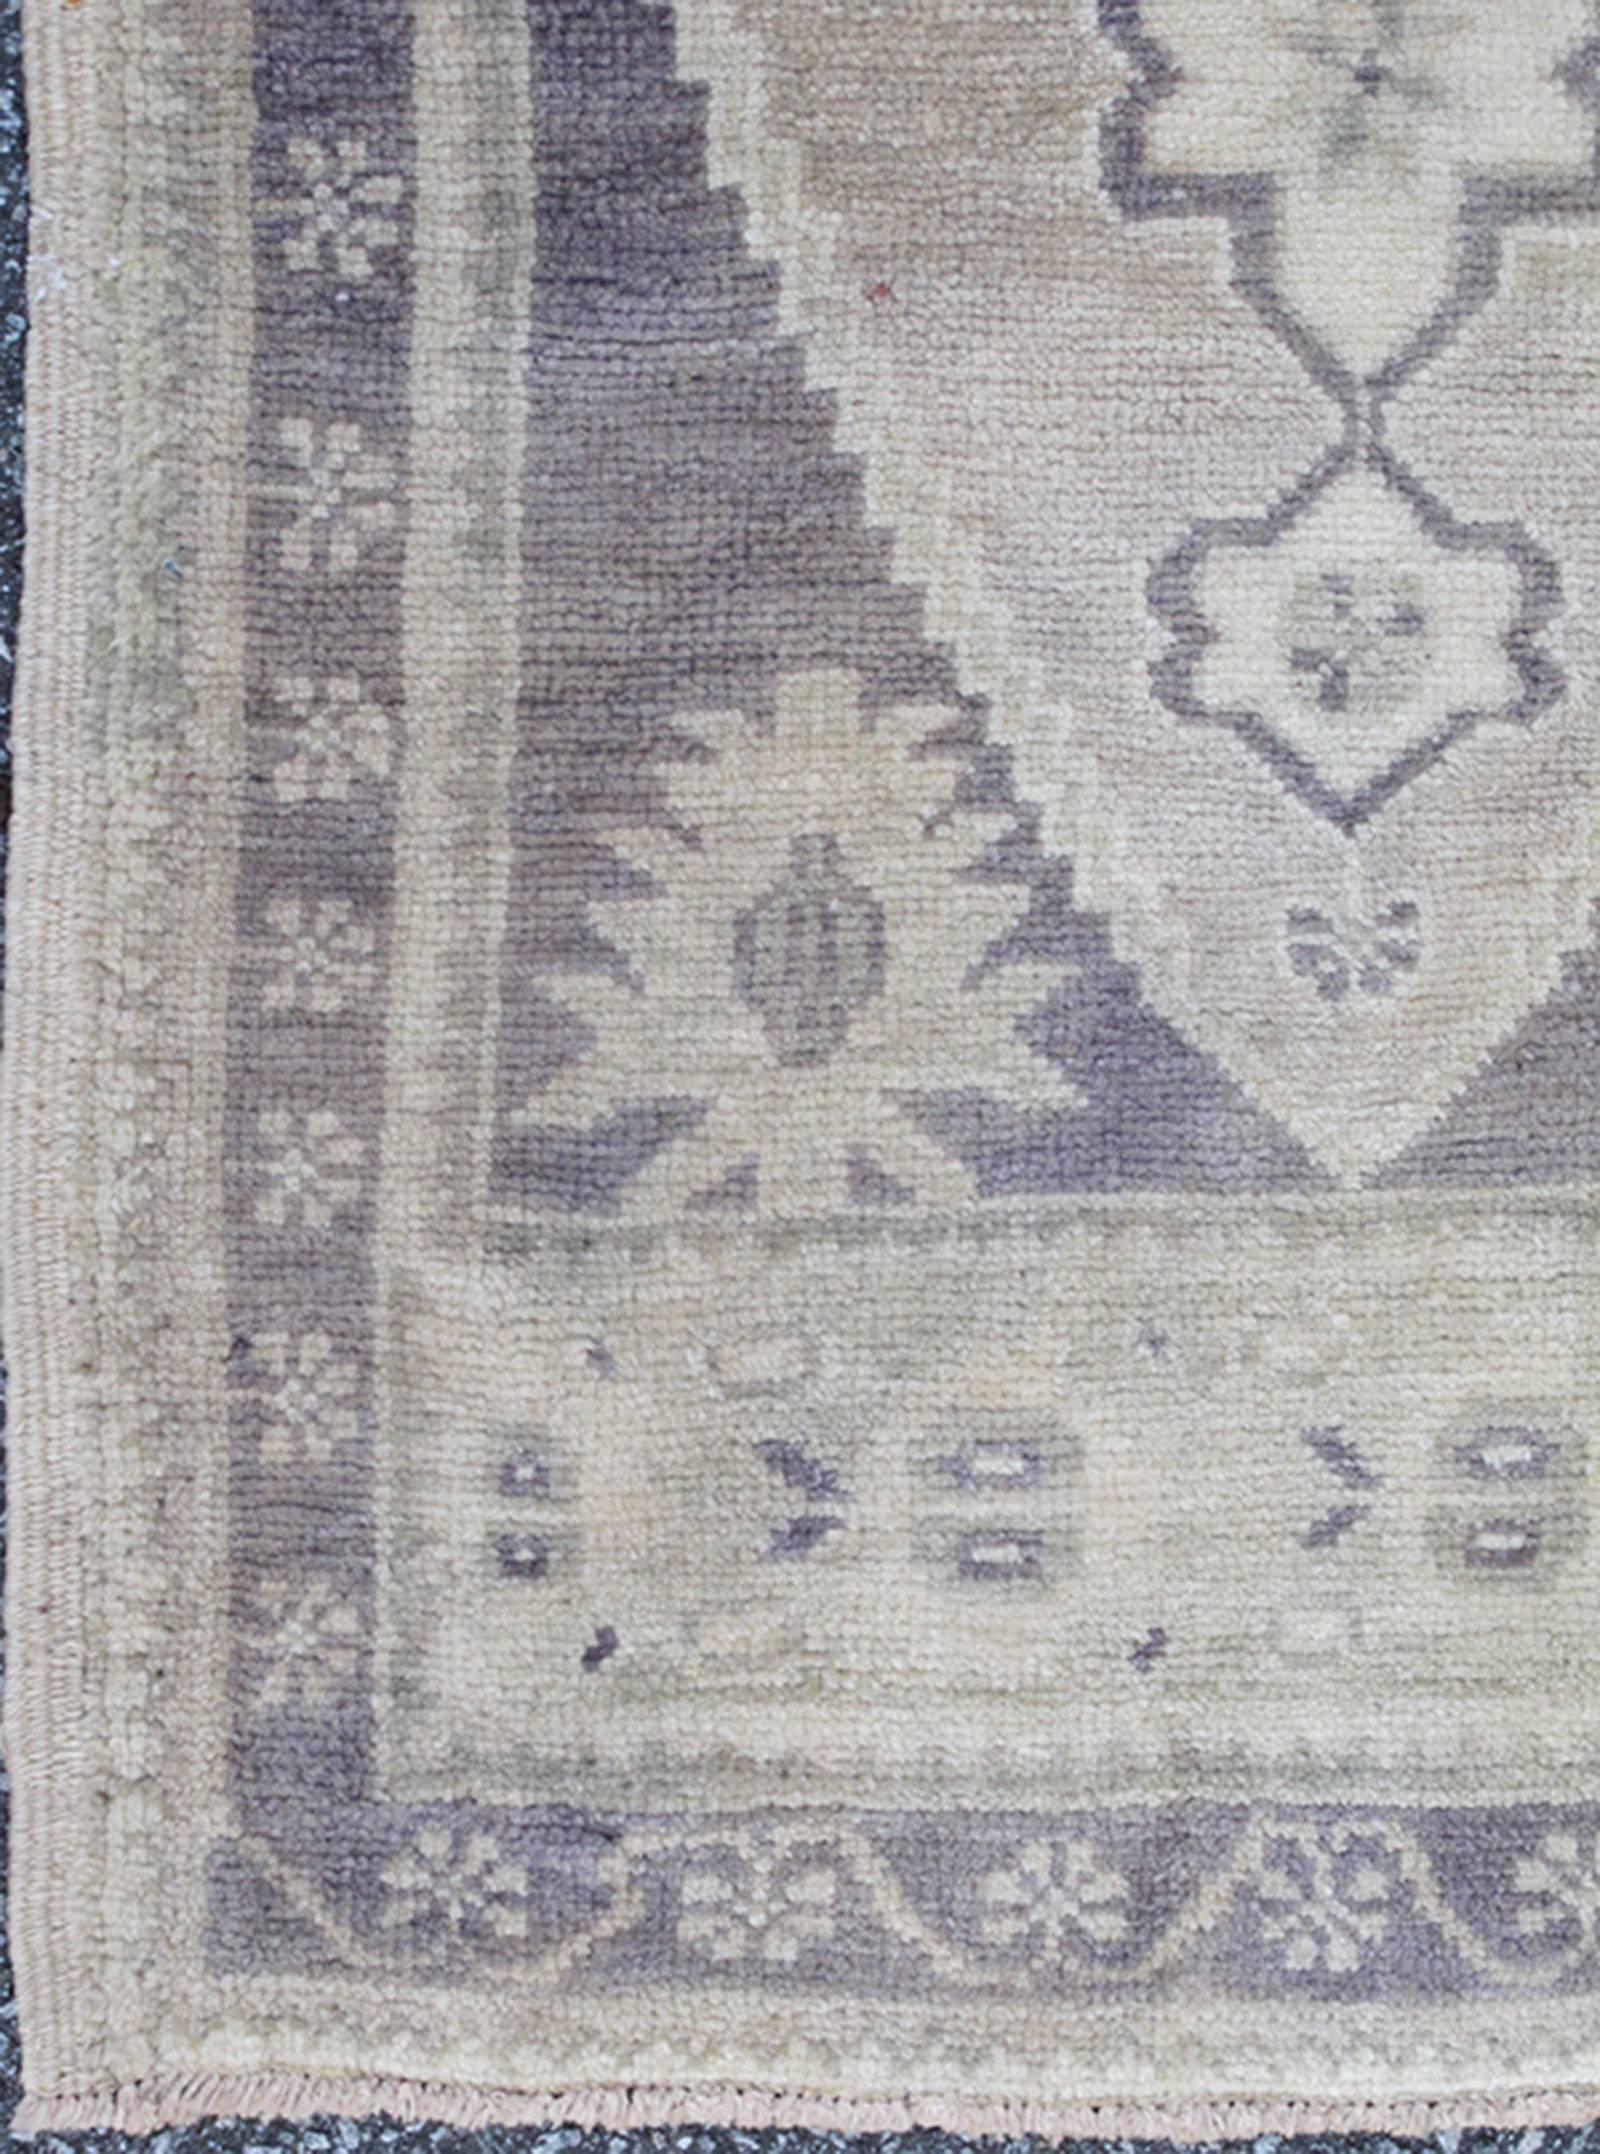 This Turkish Oushak carpet features a central medallion design, as well as patterns of smaller geometric shapes and botanical elements. The rug's qualities are enhanced by its particularly soft and lustrous wool. Colors include dark gray/purple,